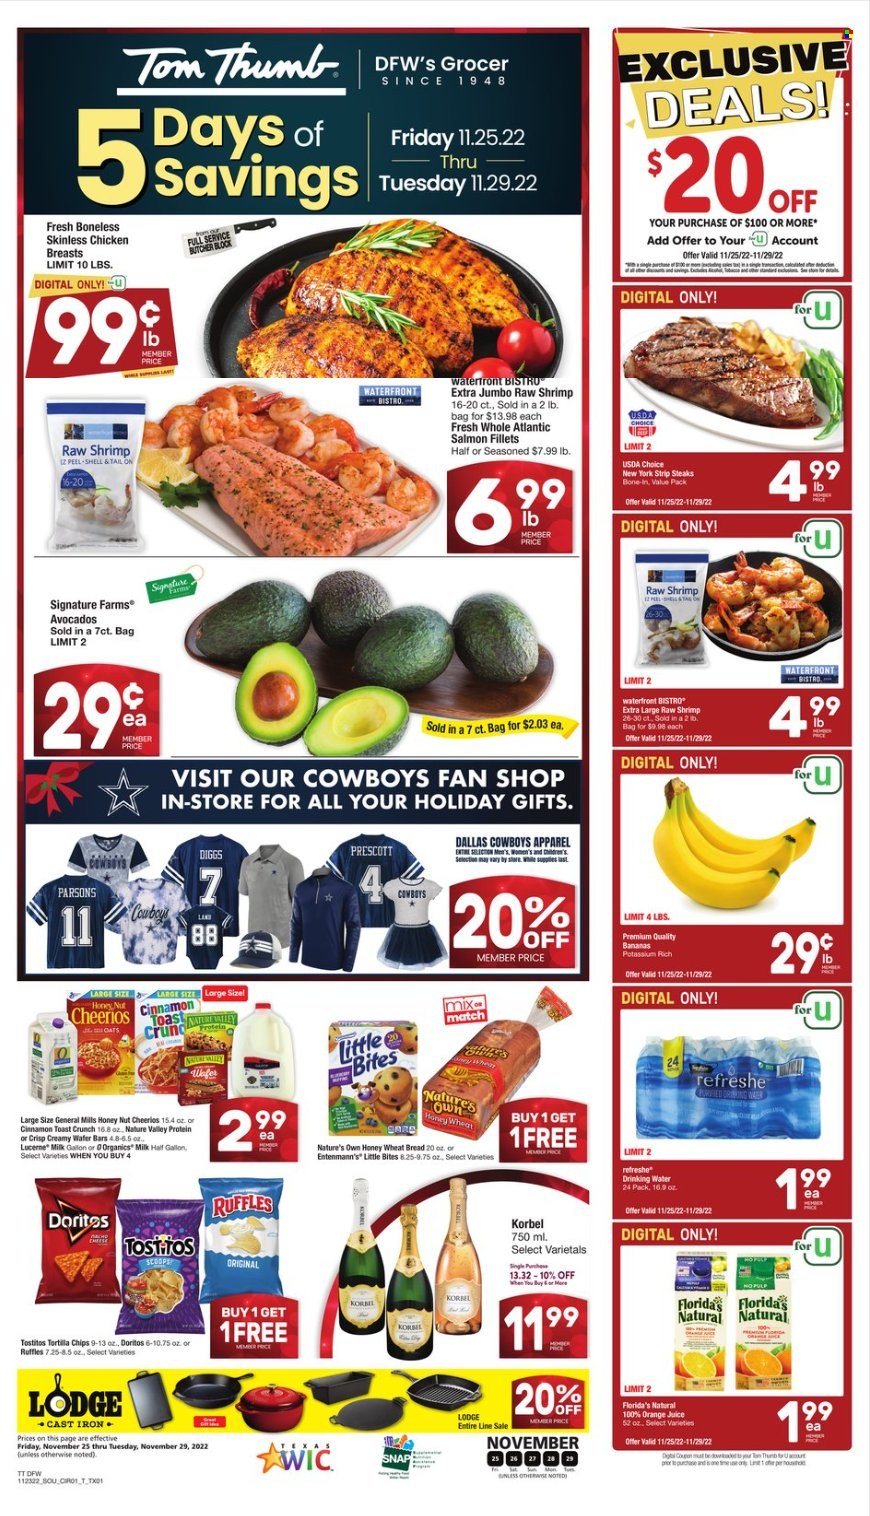 thumbnail - Tom Thumb Flyer - 11/25/2022 - 11/29/2022 - Sales products - wheat bread, Entenmann's, avocado, bananas, salmon, salmon fillet, shrimps, cheese, organic milk, wafers, Little Bites, Florida's Natural, Doritos, tortilla chips, chips, Ruffles, Tostitos, Cheerios, Nature Valley, cinnamon, orange juice, juice, chicken breasts, beef meat, steak, striploin steak. Page 1.